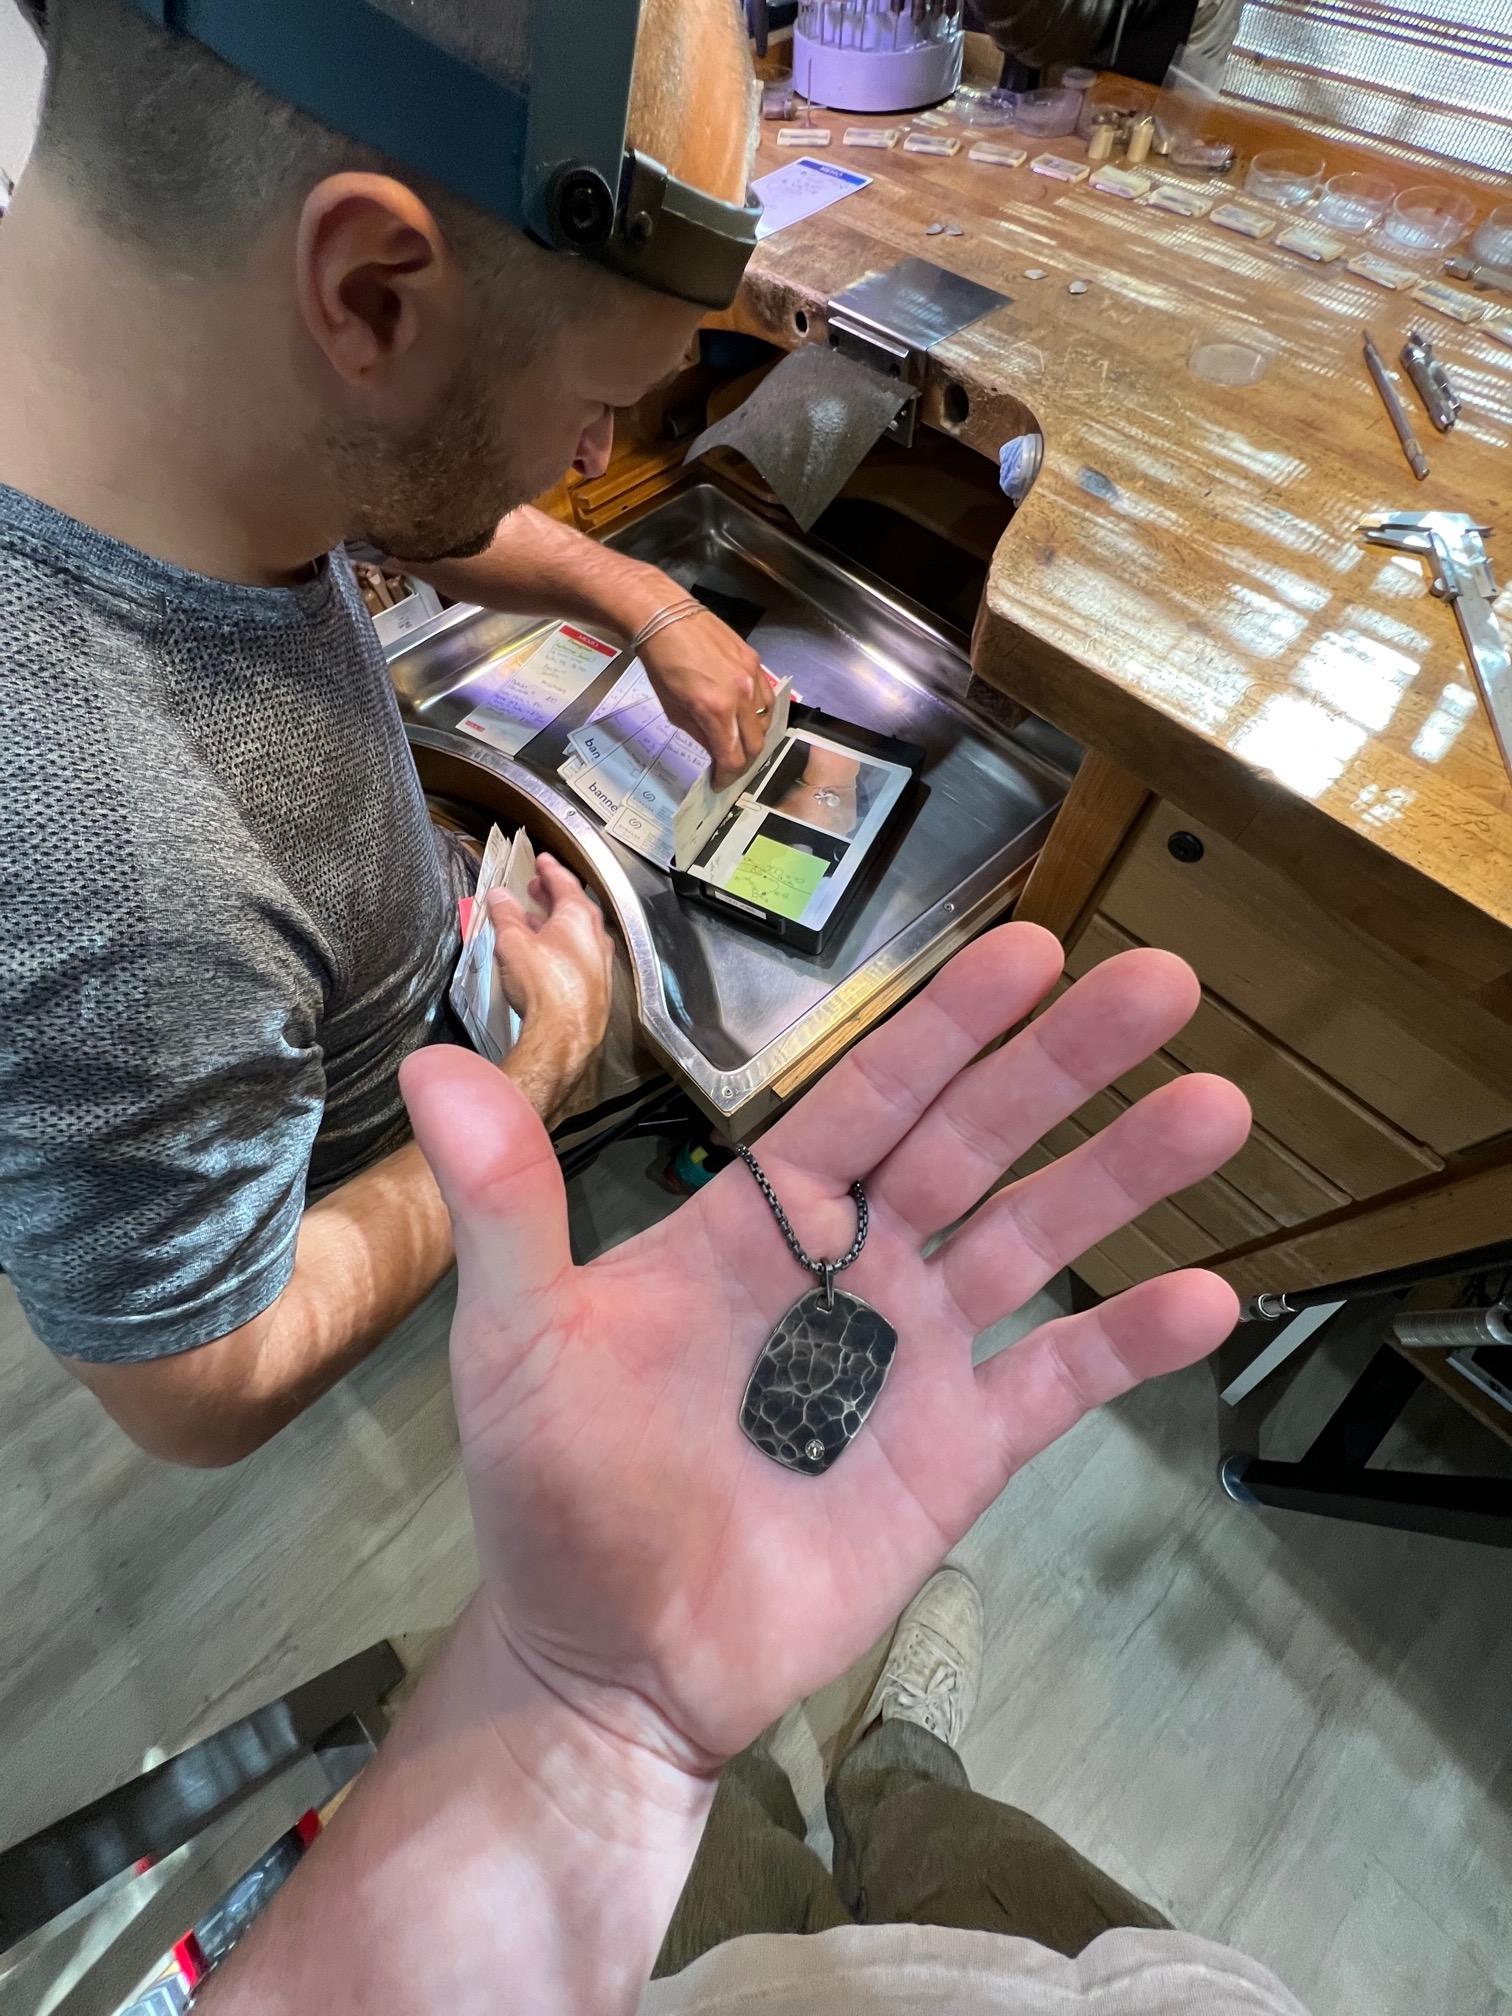 Hand crafted and forged dog tag by Jared Porter Studio.  This dog tag is sterling silver and has a dark patina (oxidized)  finish to the pendant and chain.  The surface has a hand pounded finish to that mimics water ripple's.  The bottom of  the